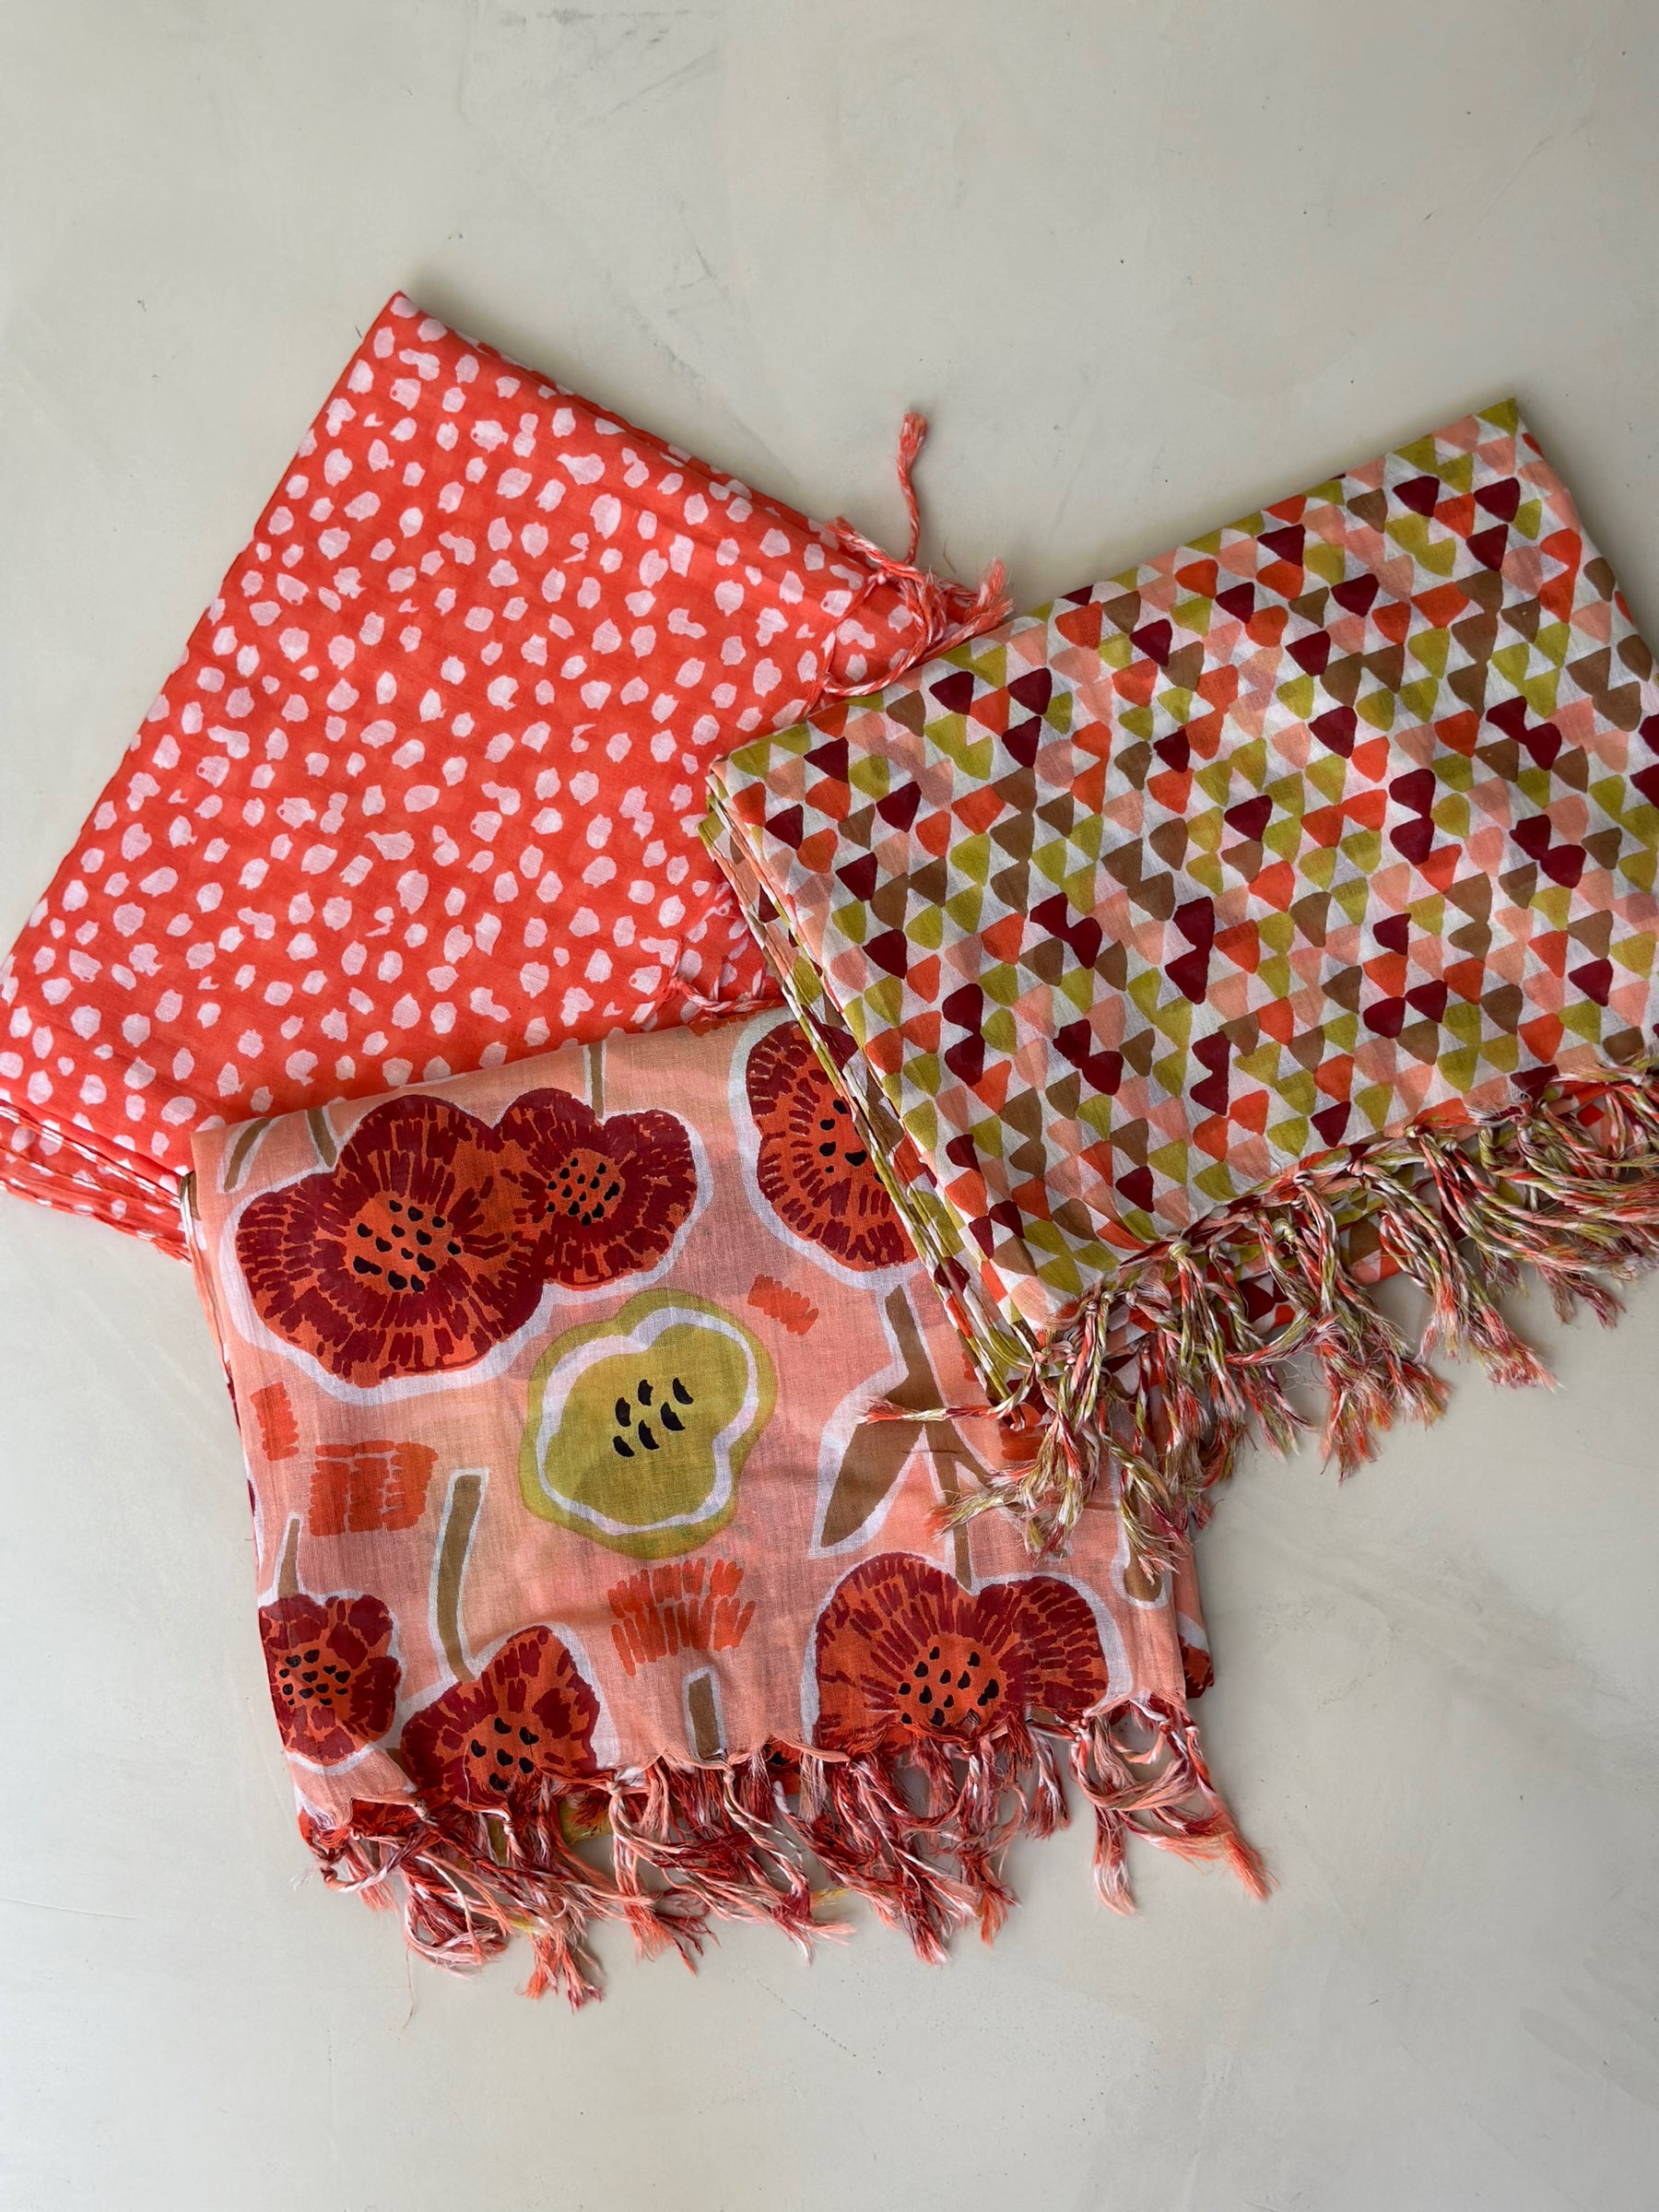 Summer Blomme Cotton Scarf - Coral